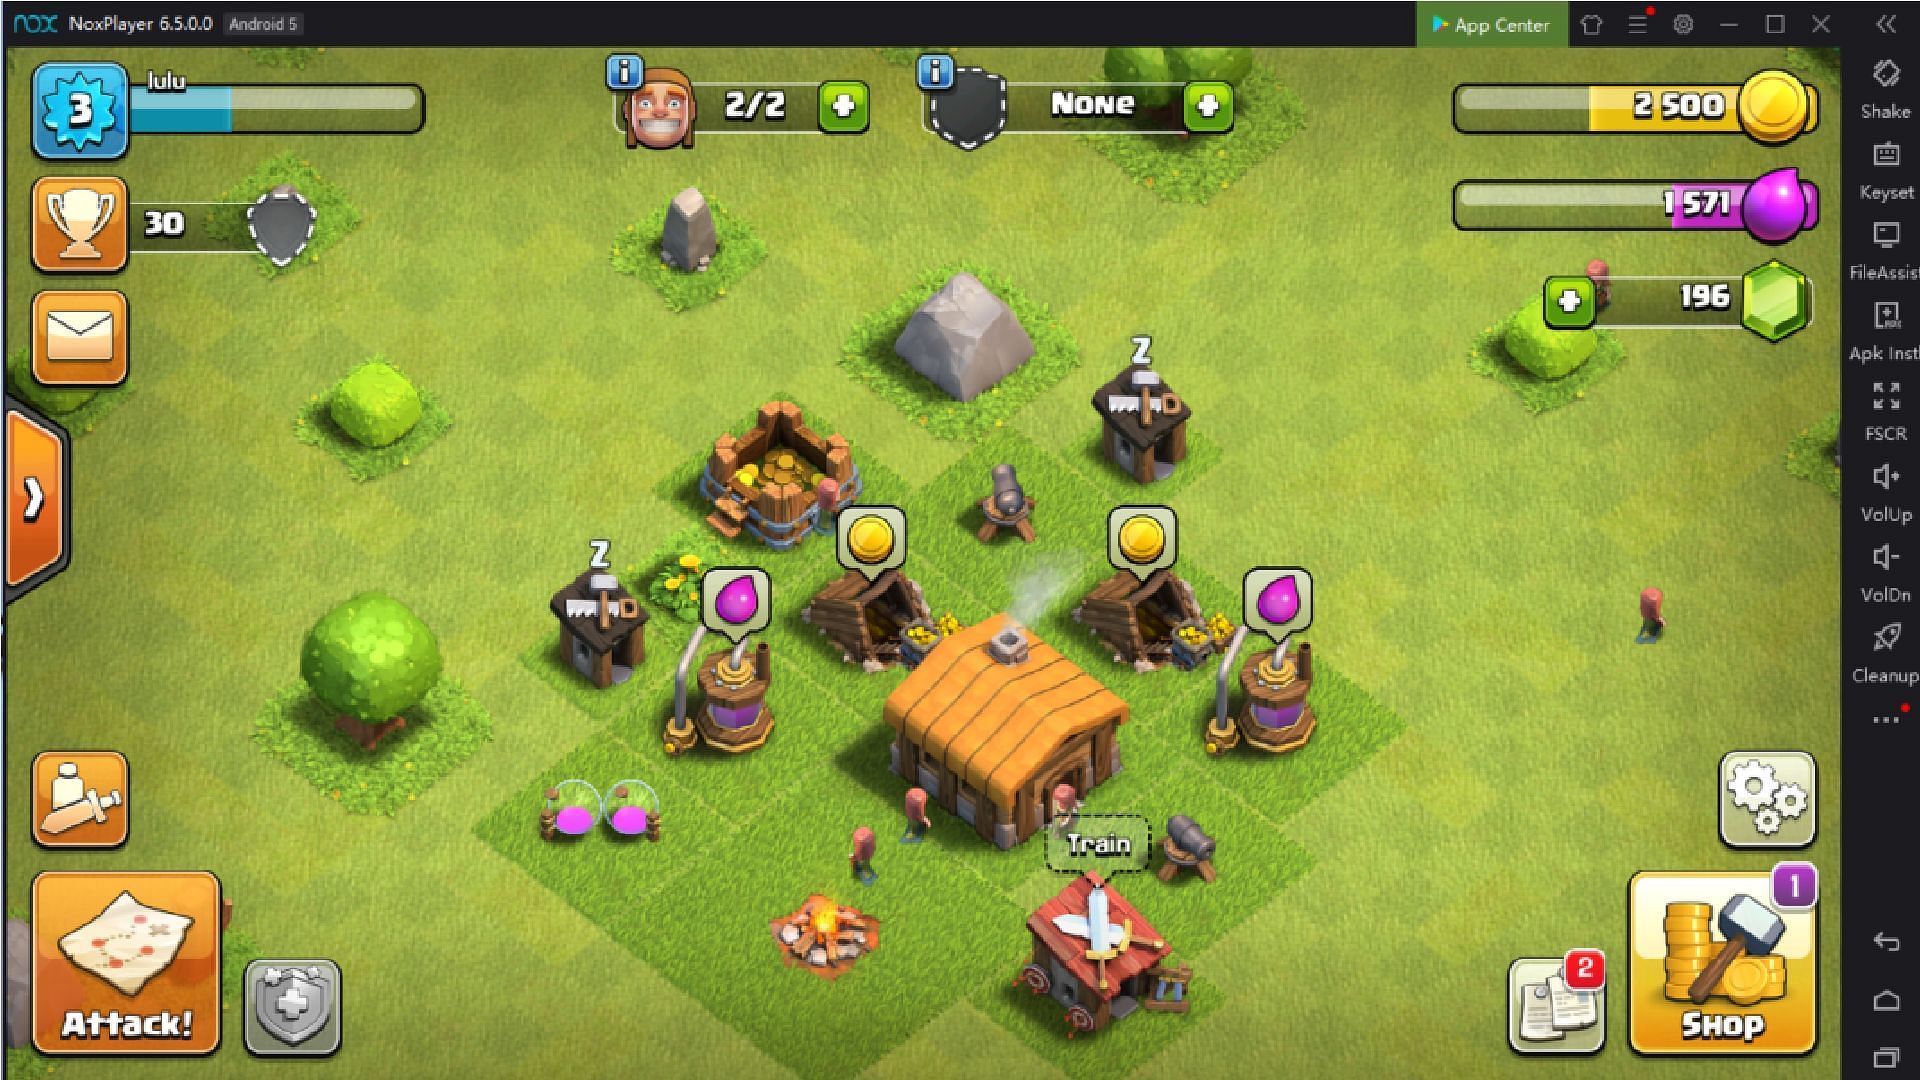 You can play CoC on PC with the help of emulators (Image via Bluestacks)